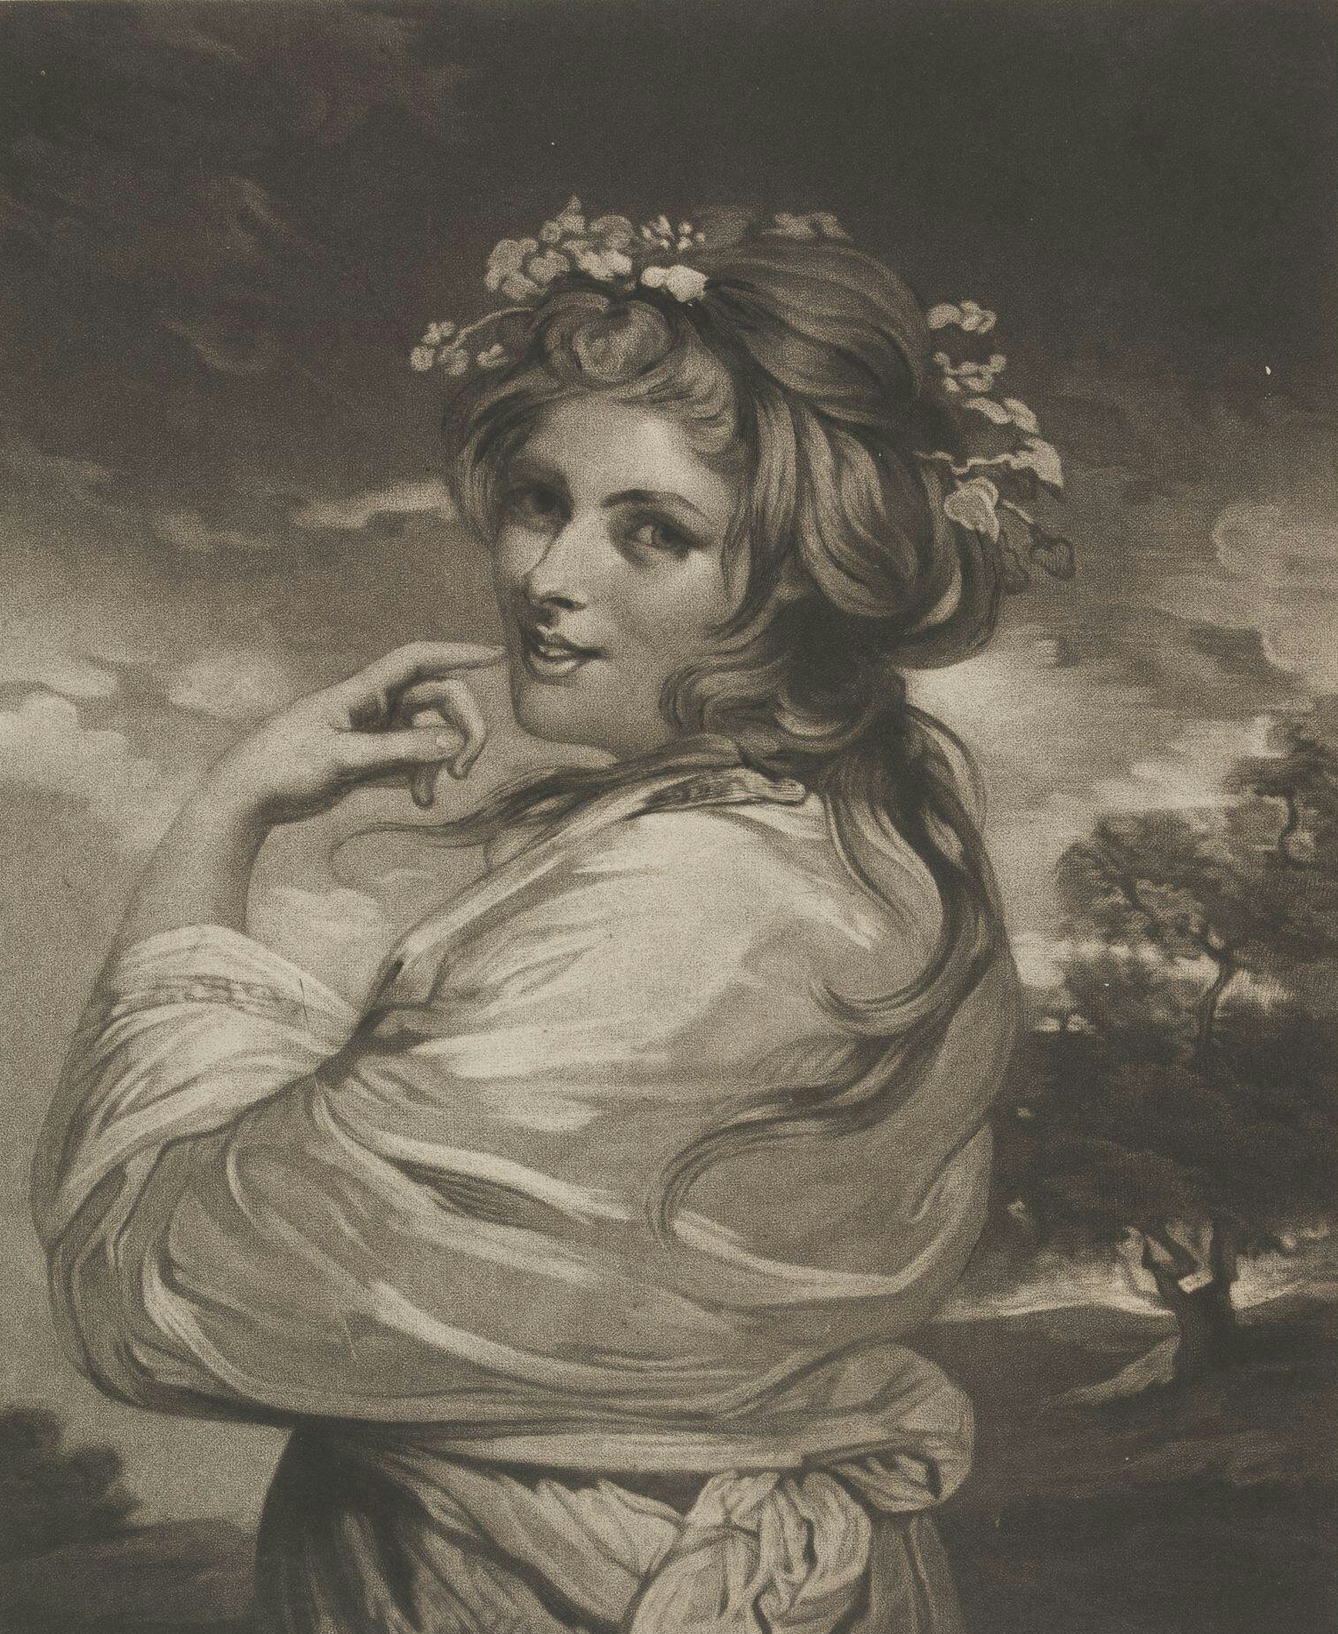 Half-length portrait, standing, turned to left and looking to front over her shoulder. The sitter has flowers in her hair and is standing in a landscape.